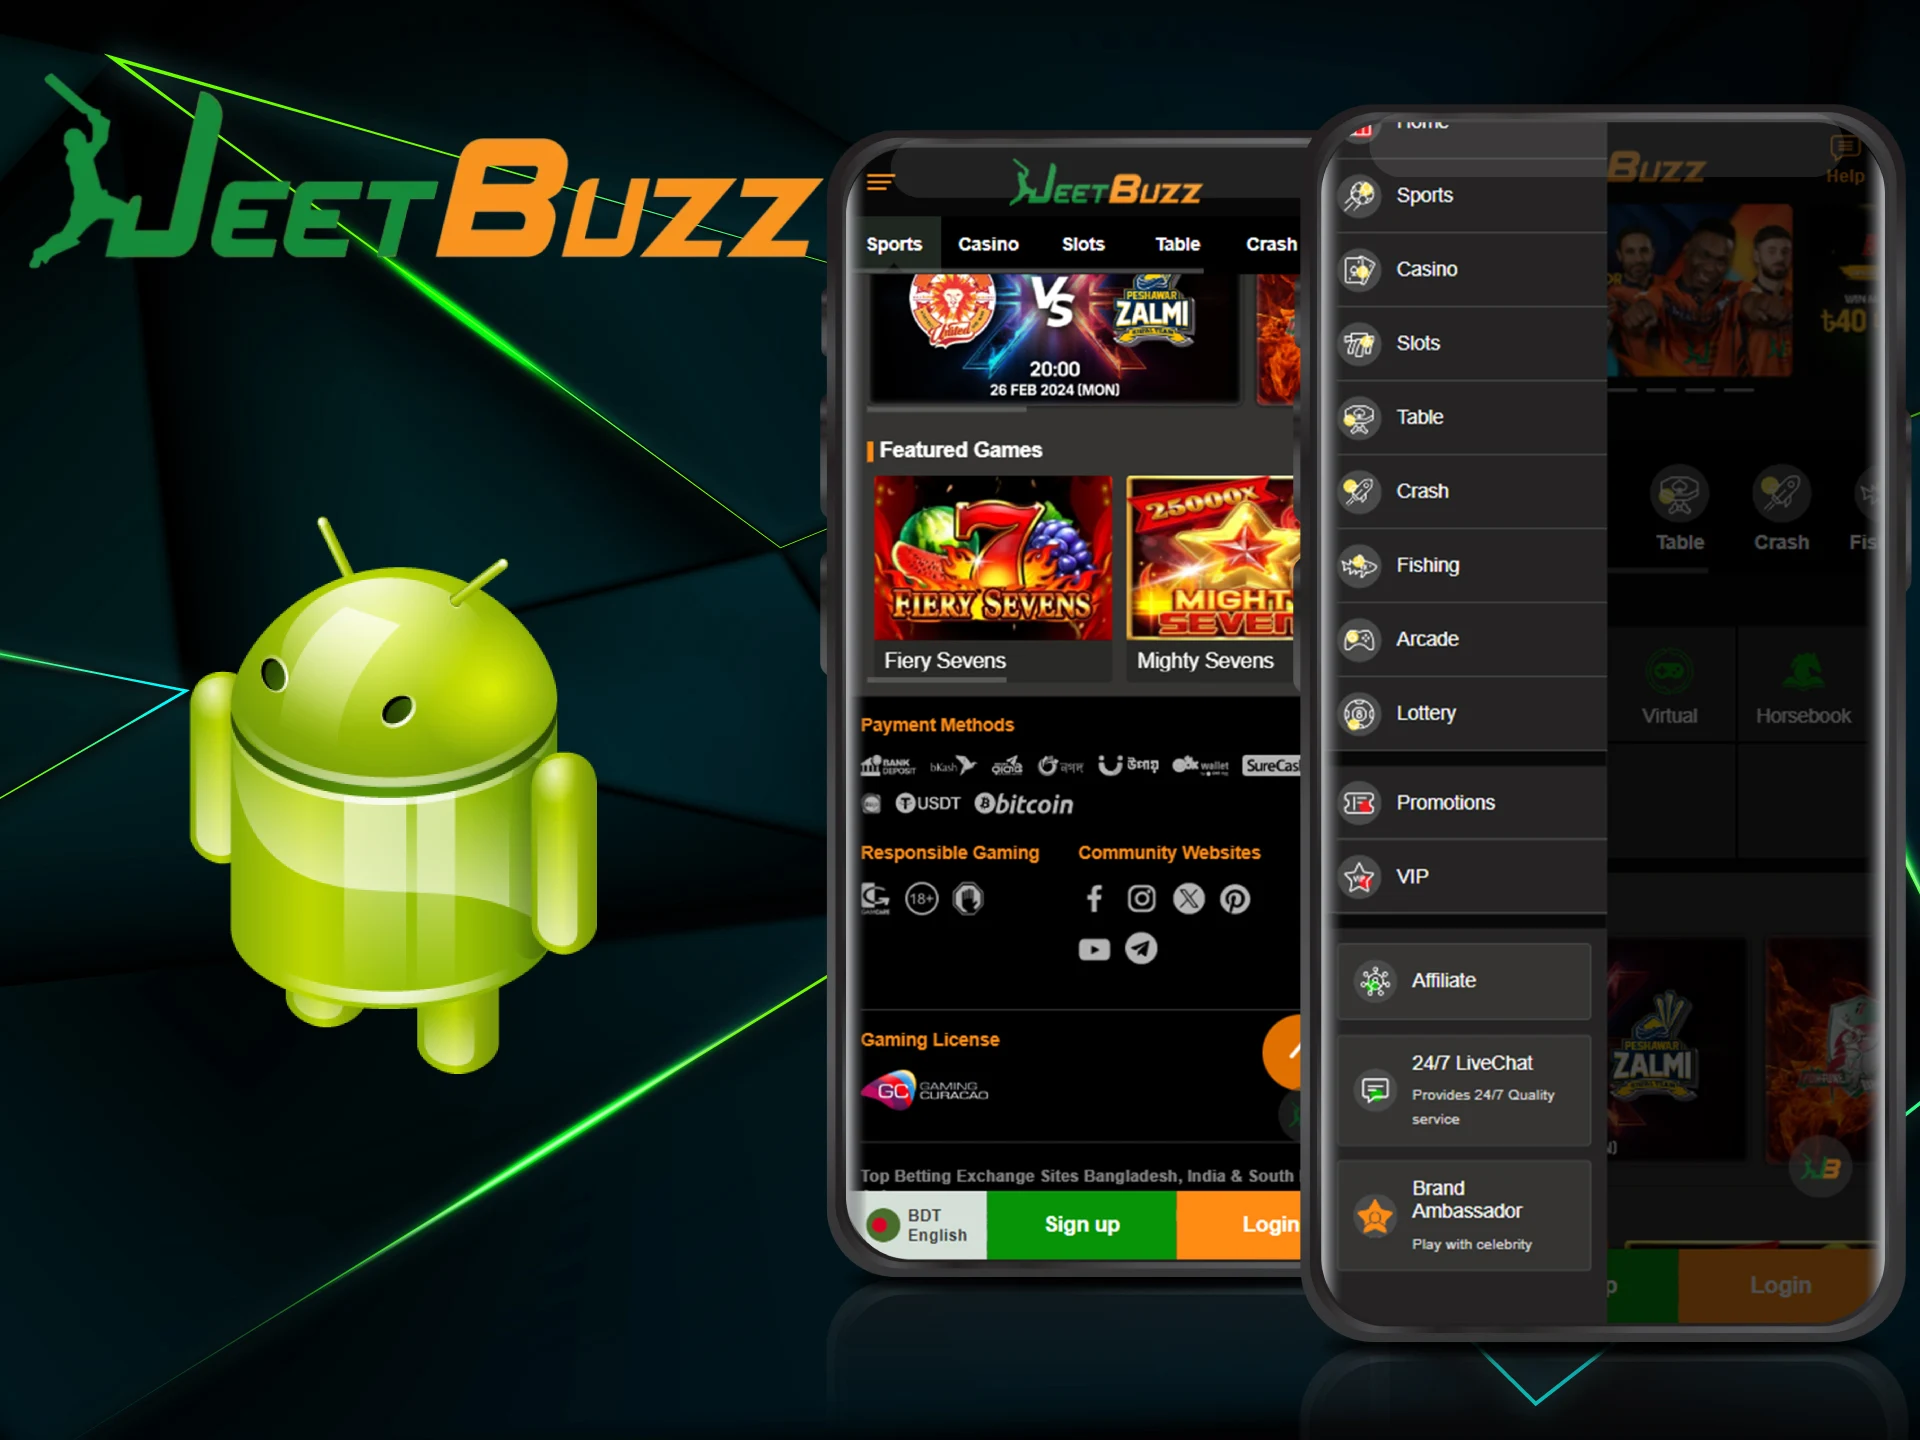 The JeetBuzz app improves compatibility with Android devices.